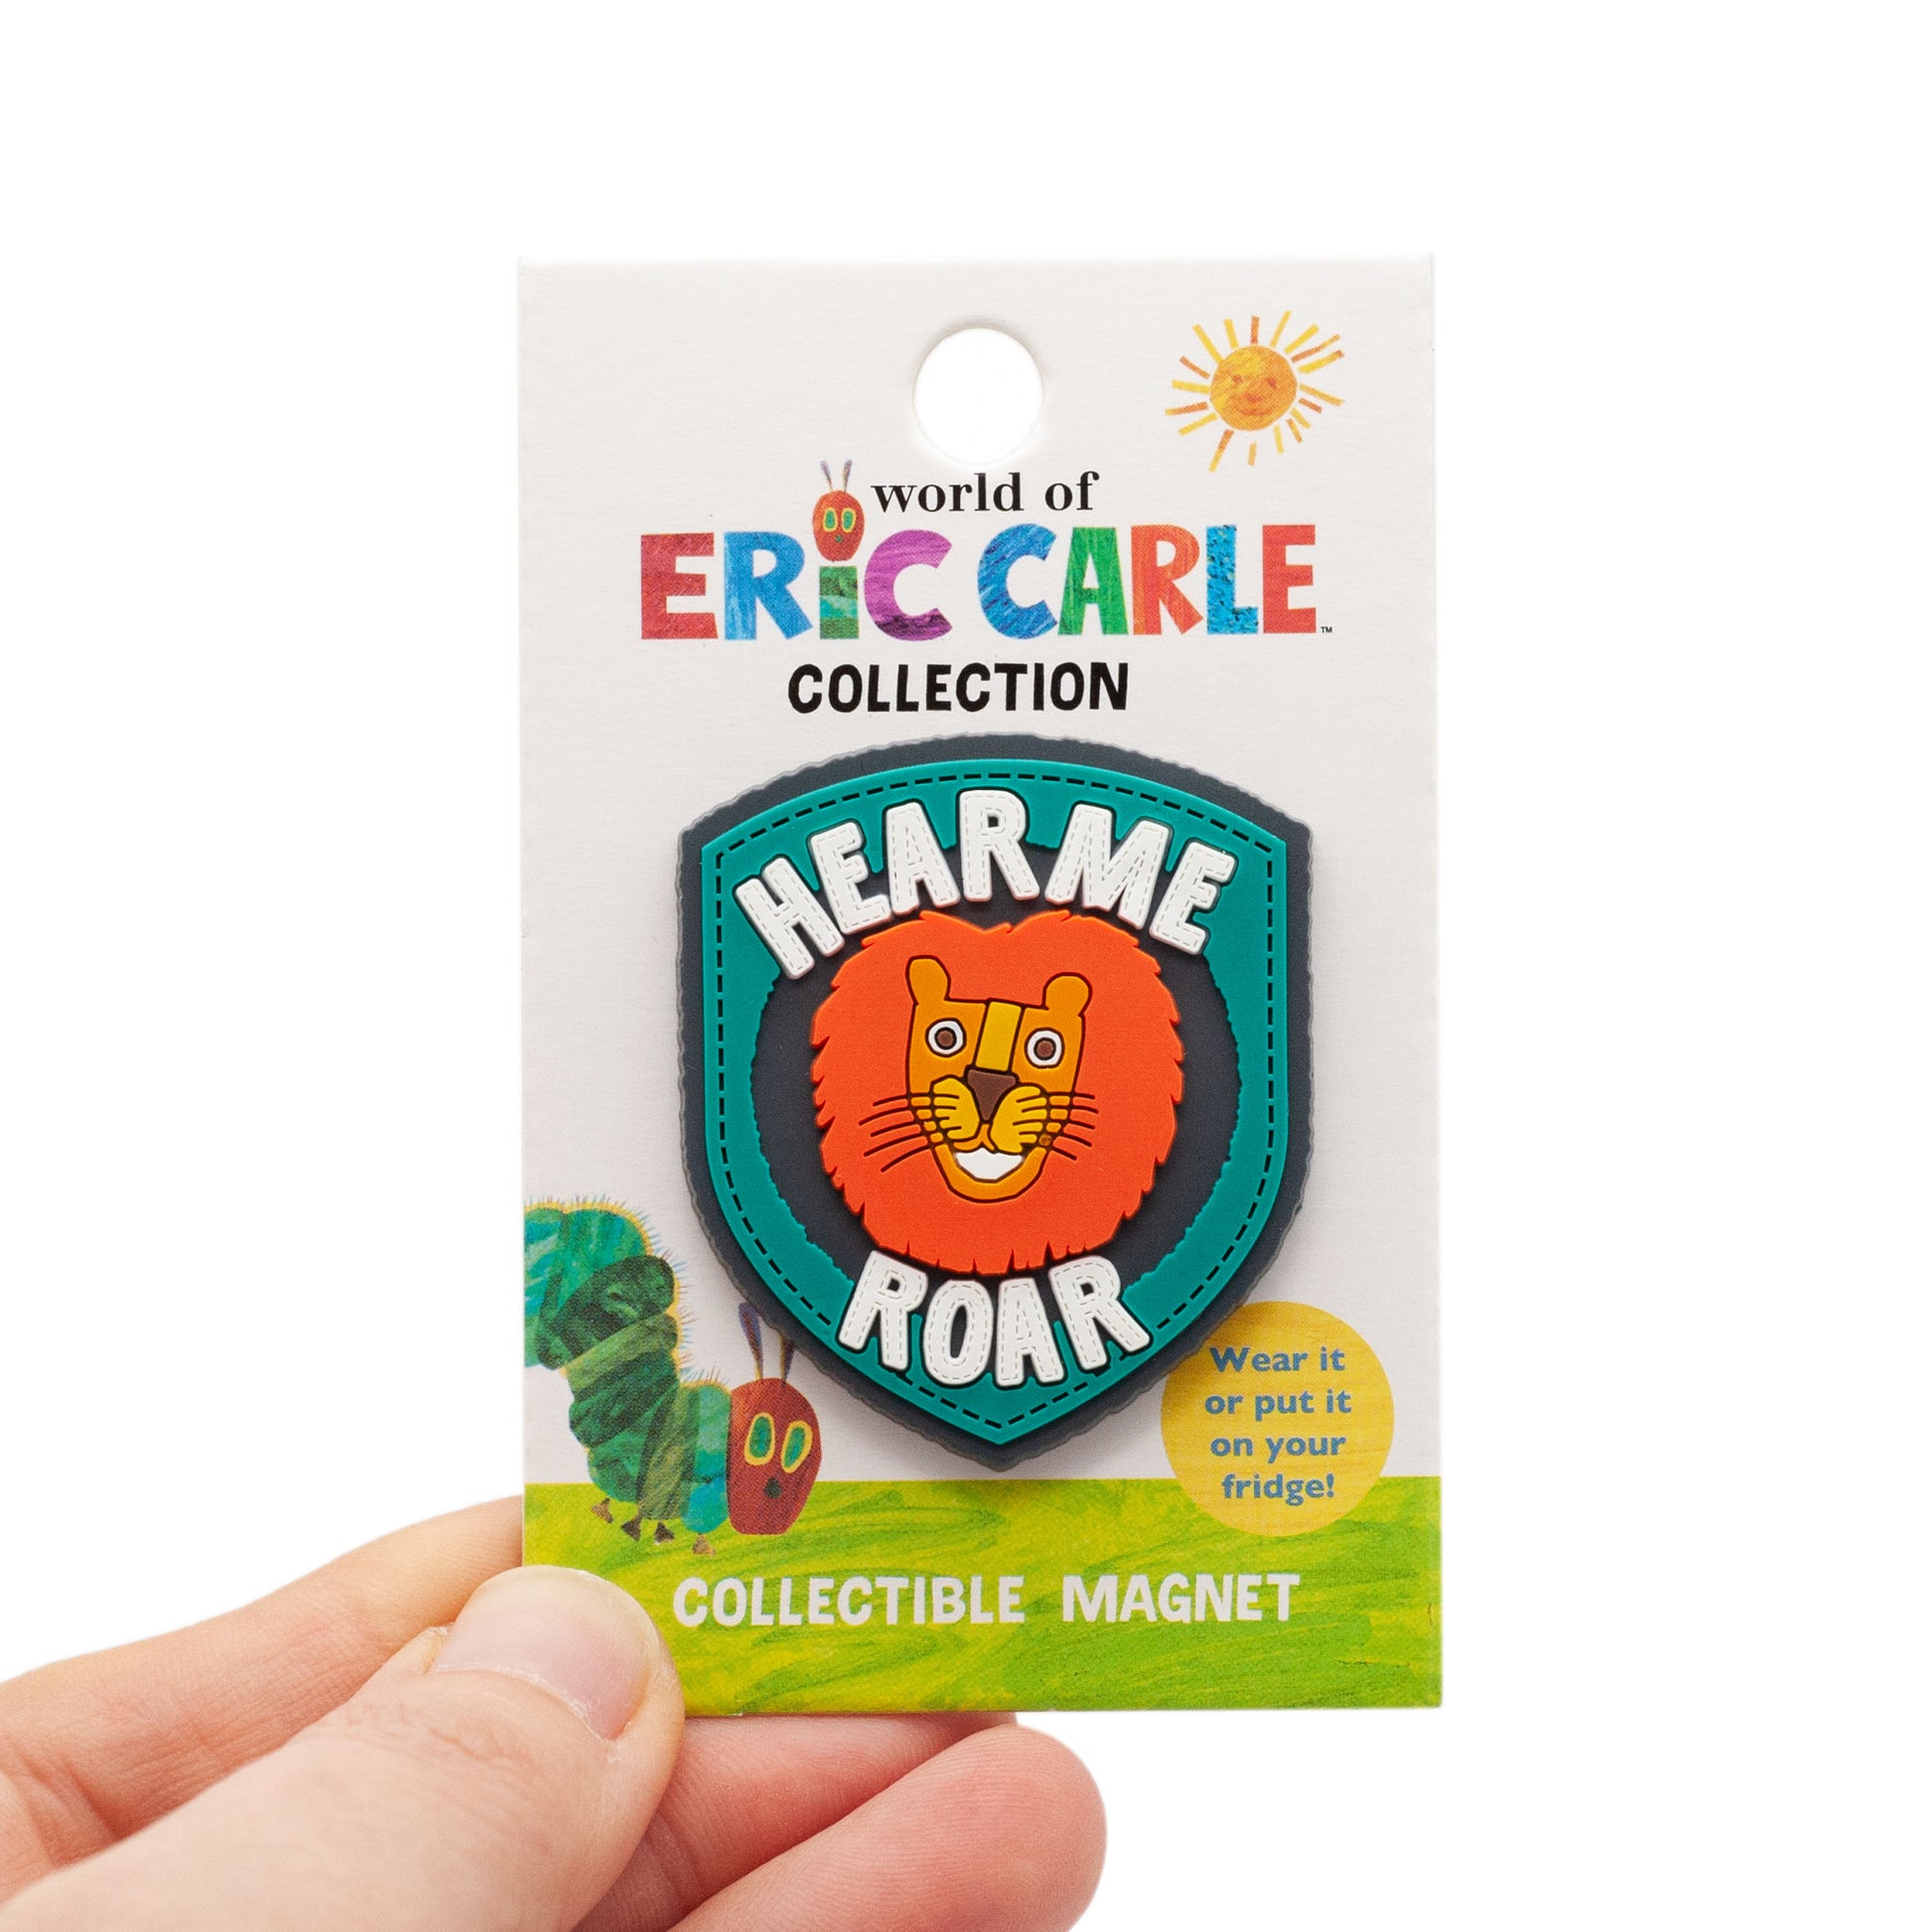 The Very Hungry Caterpillar PVC enamel pin on white background. Caterpillar has a red face with yellow and green eyes , with purple antennas, and a light green and dark green body. magnet is over top of World of Eric Carle backing card.